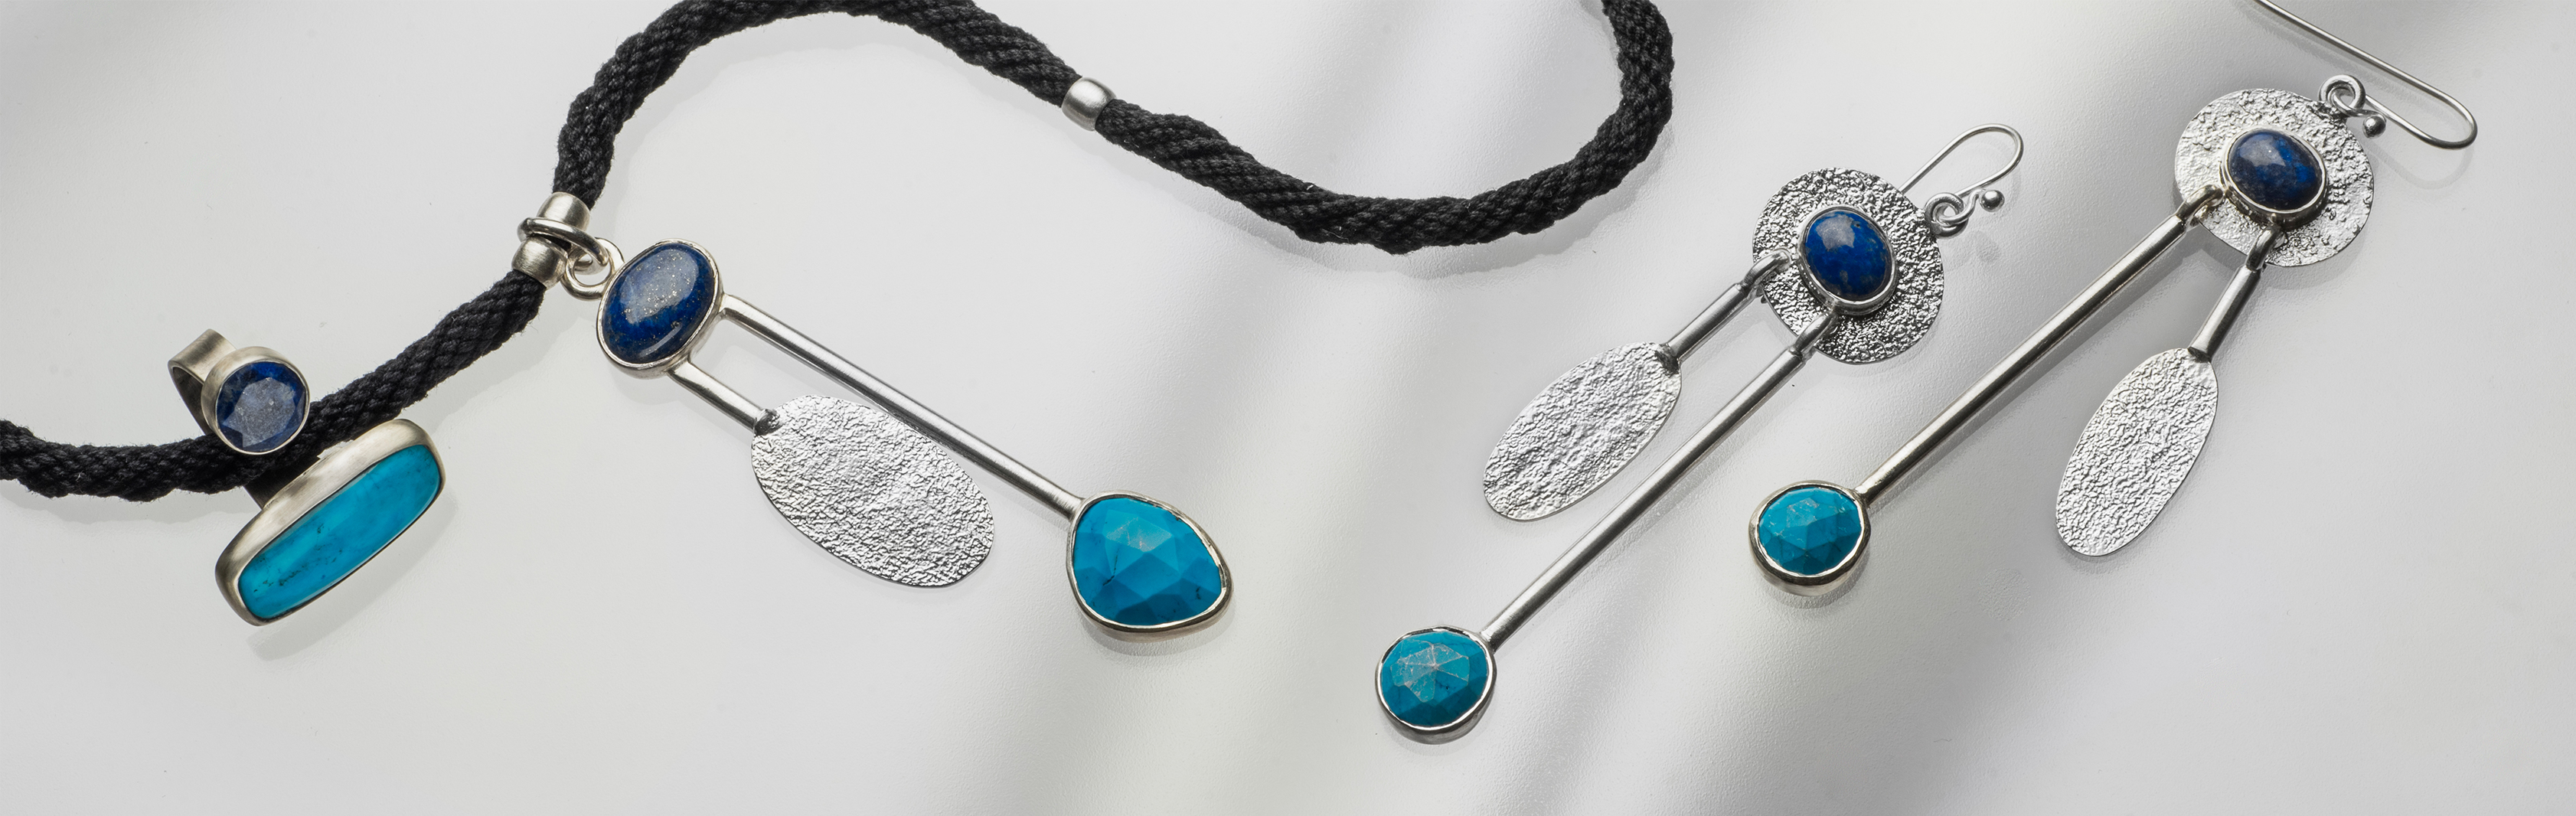 Blue Sea and Sky Collection | 925 Sterling Silver Jewelry with Turquoise and Lapis lazuli